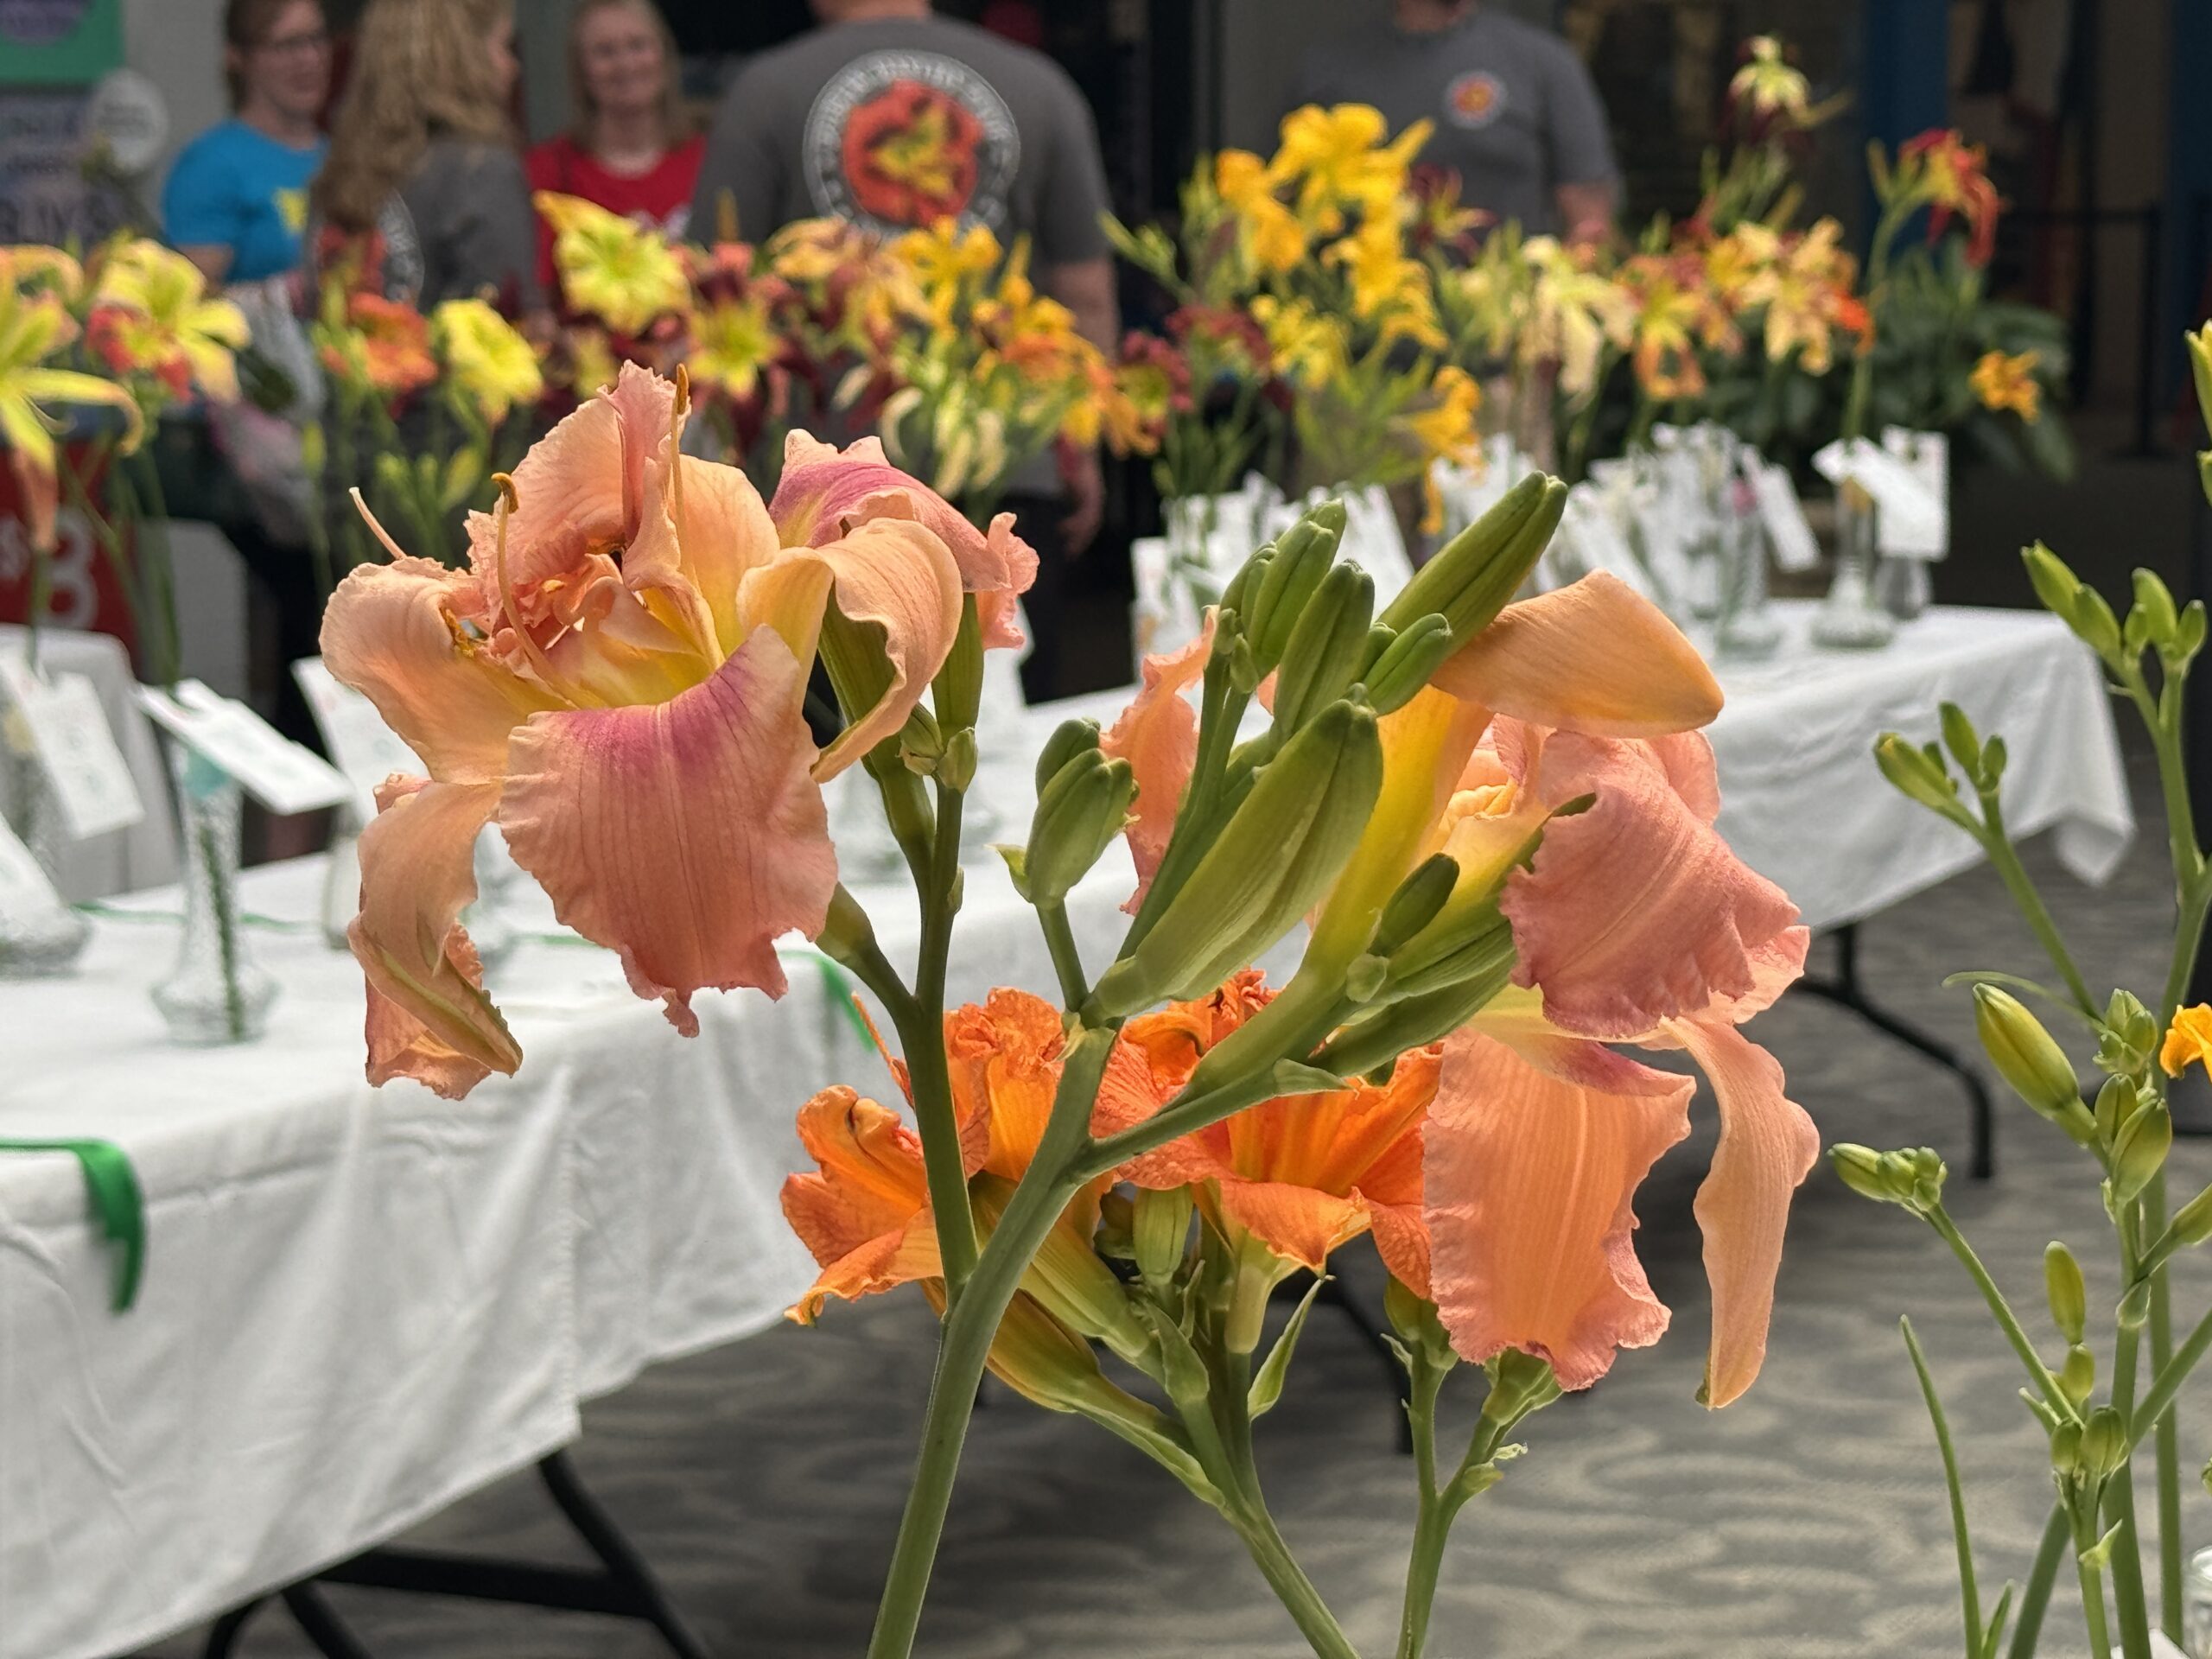 Several blooming scapes lined up in vases on a table, following judging at the Dublin Daylily Show and Sale.